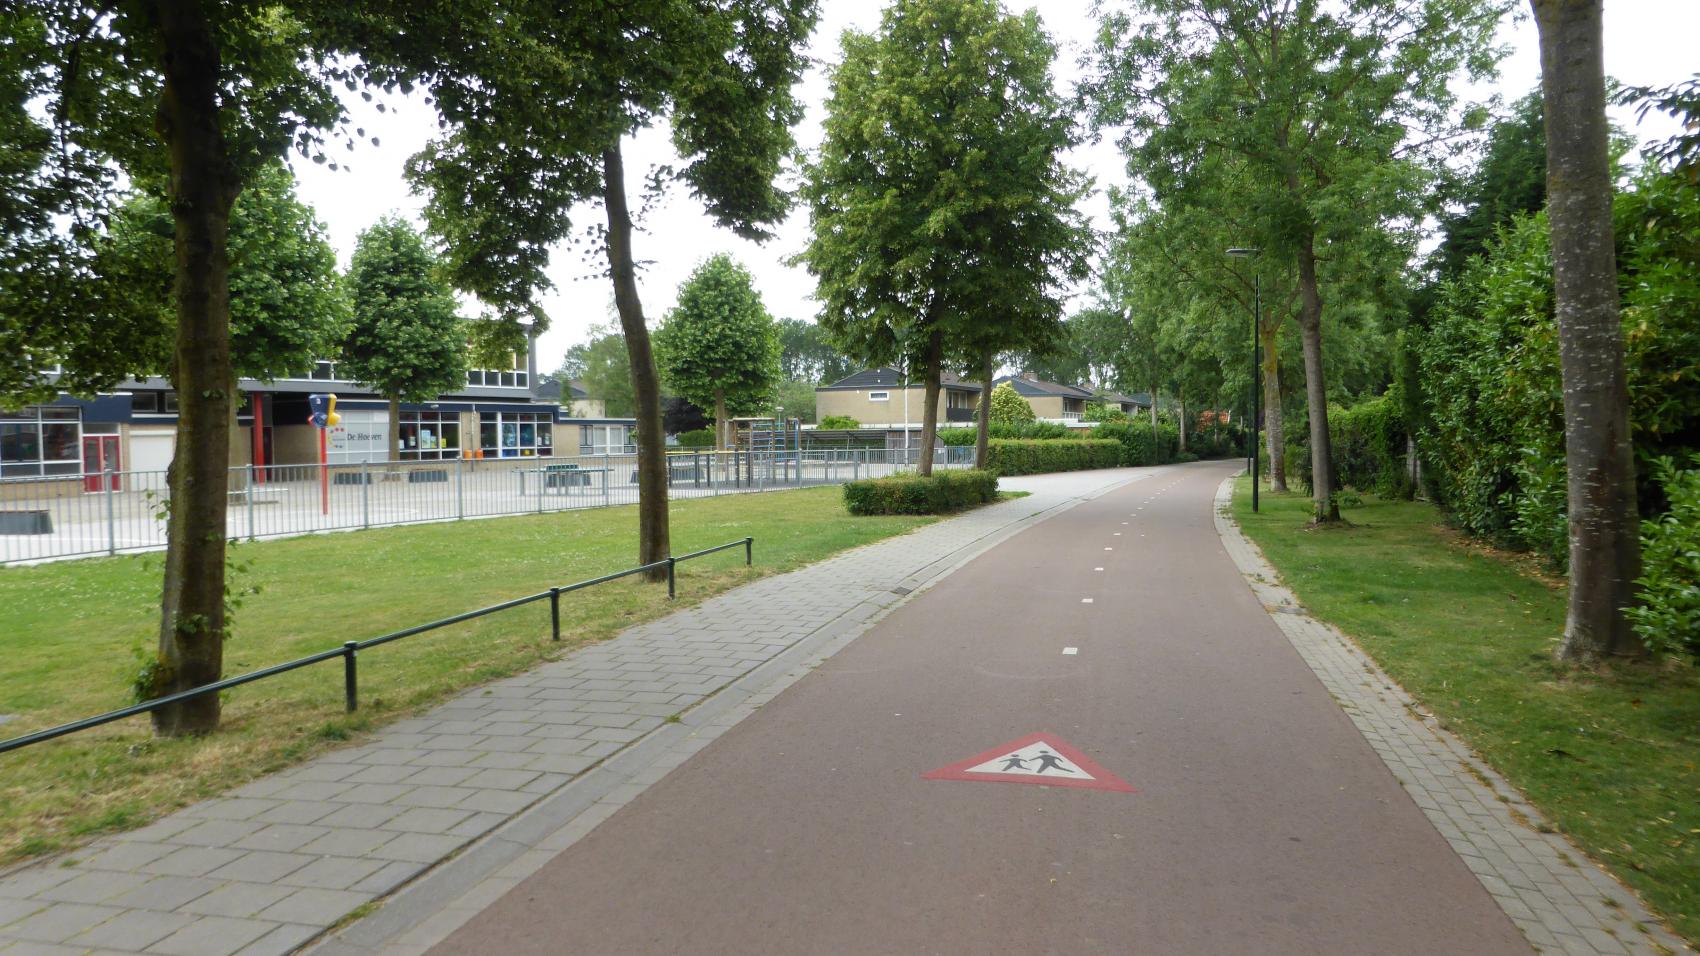 Until eighties this green corridor used to be a car road connecting Beuningen with Nijmegen. Now kids can travel to the catholic elementary school De Hoeven (left side of the picture) by bicycle without being endangered by car traffic.